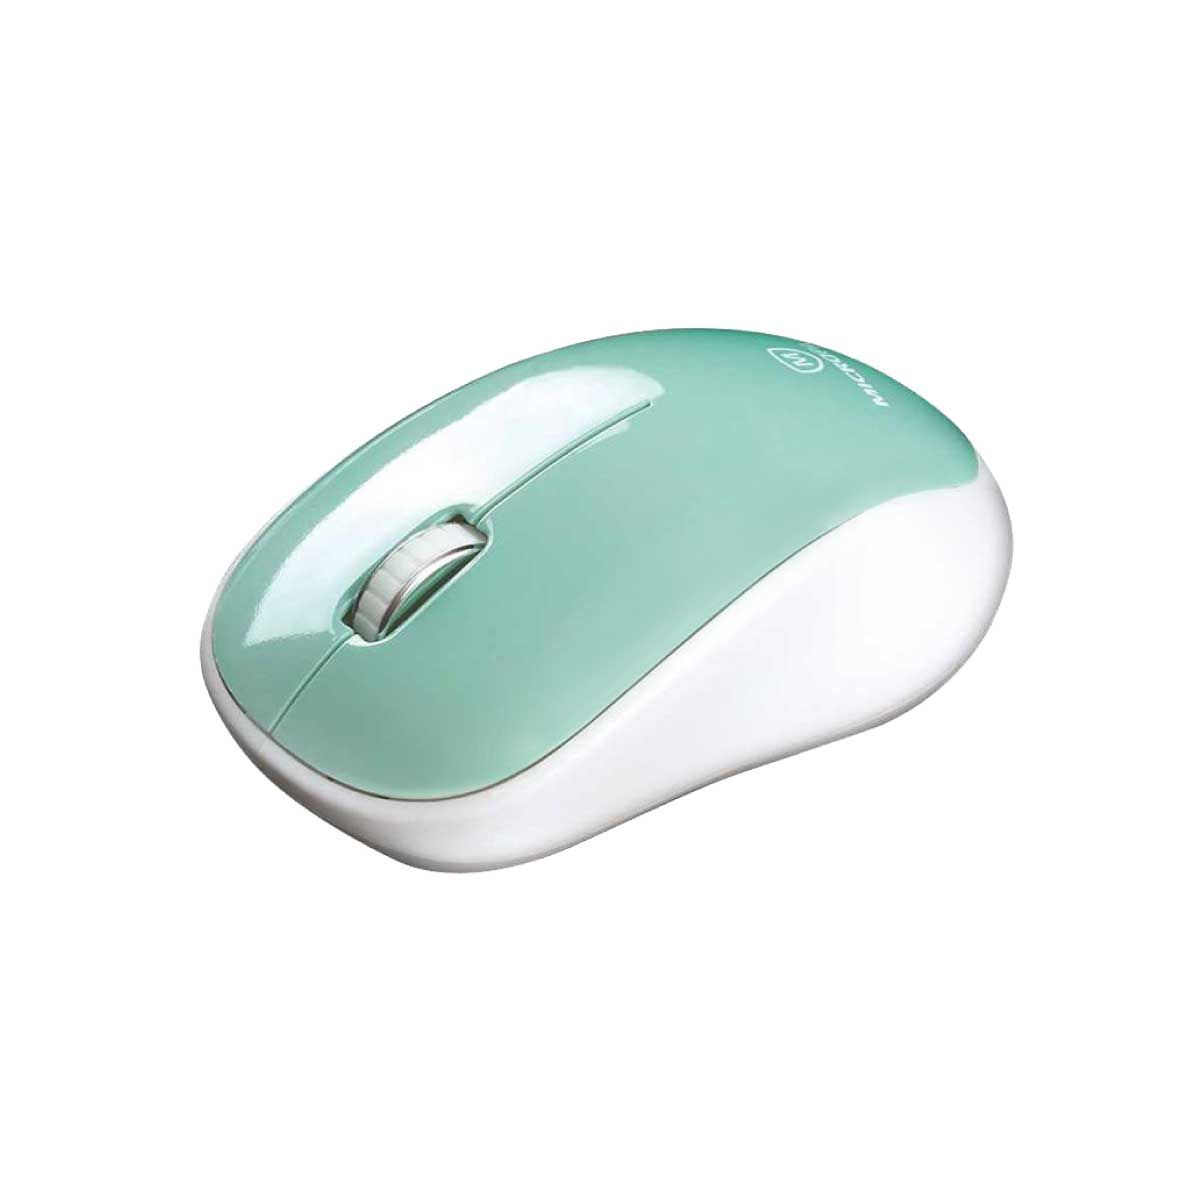 MOUSE (เมาส์ไร้สาย) MICROPACK MP-771W ST WIRELESS SILENT MOUSE (GREEN)